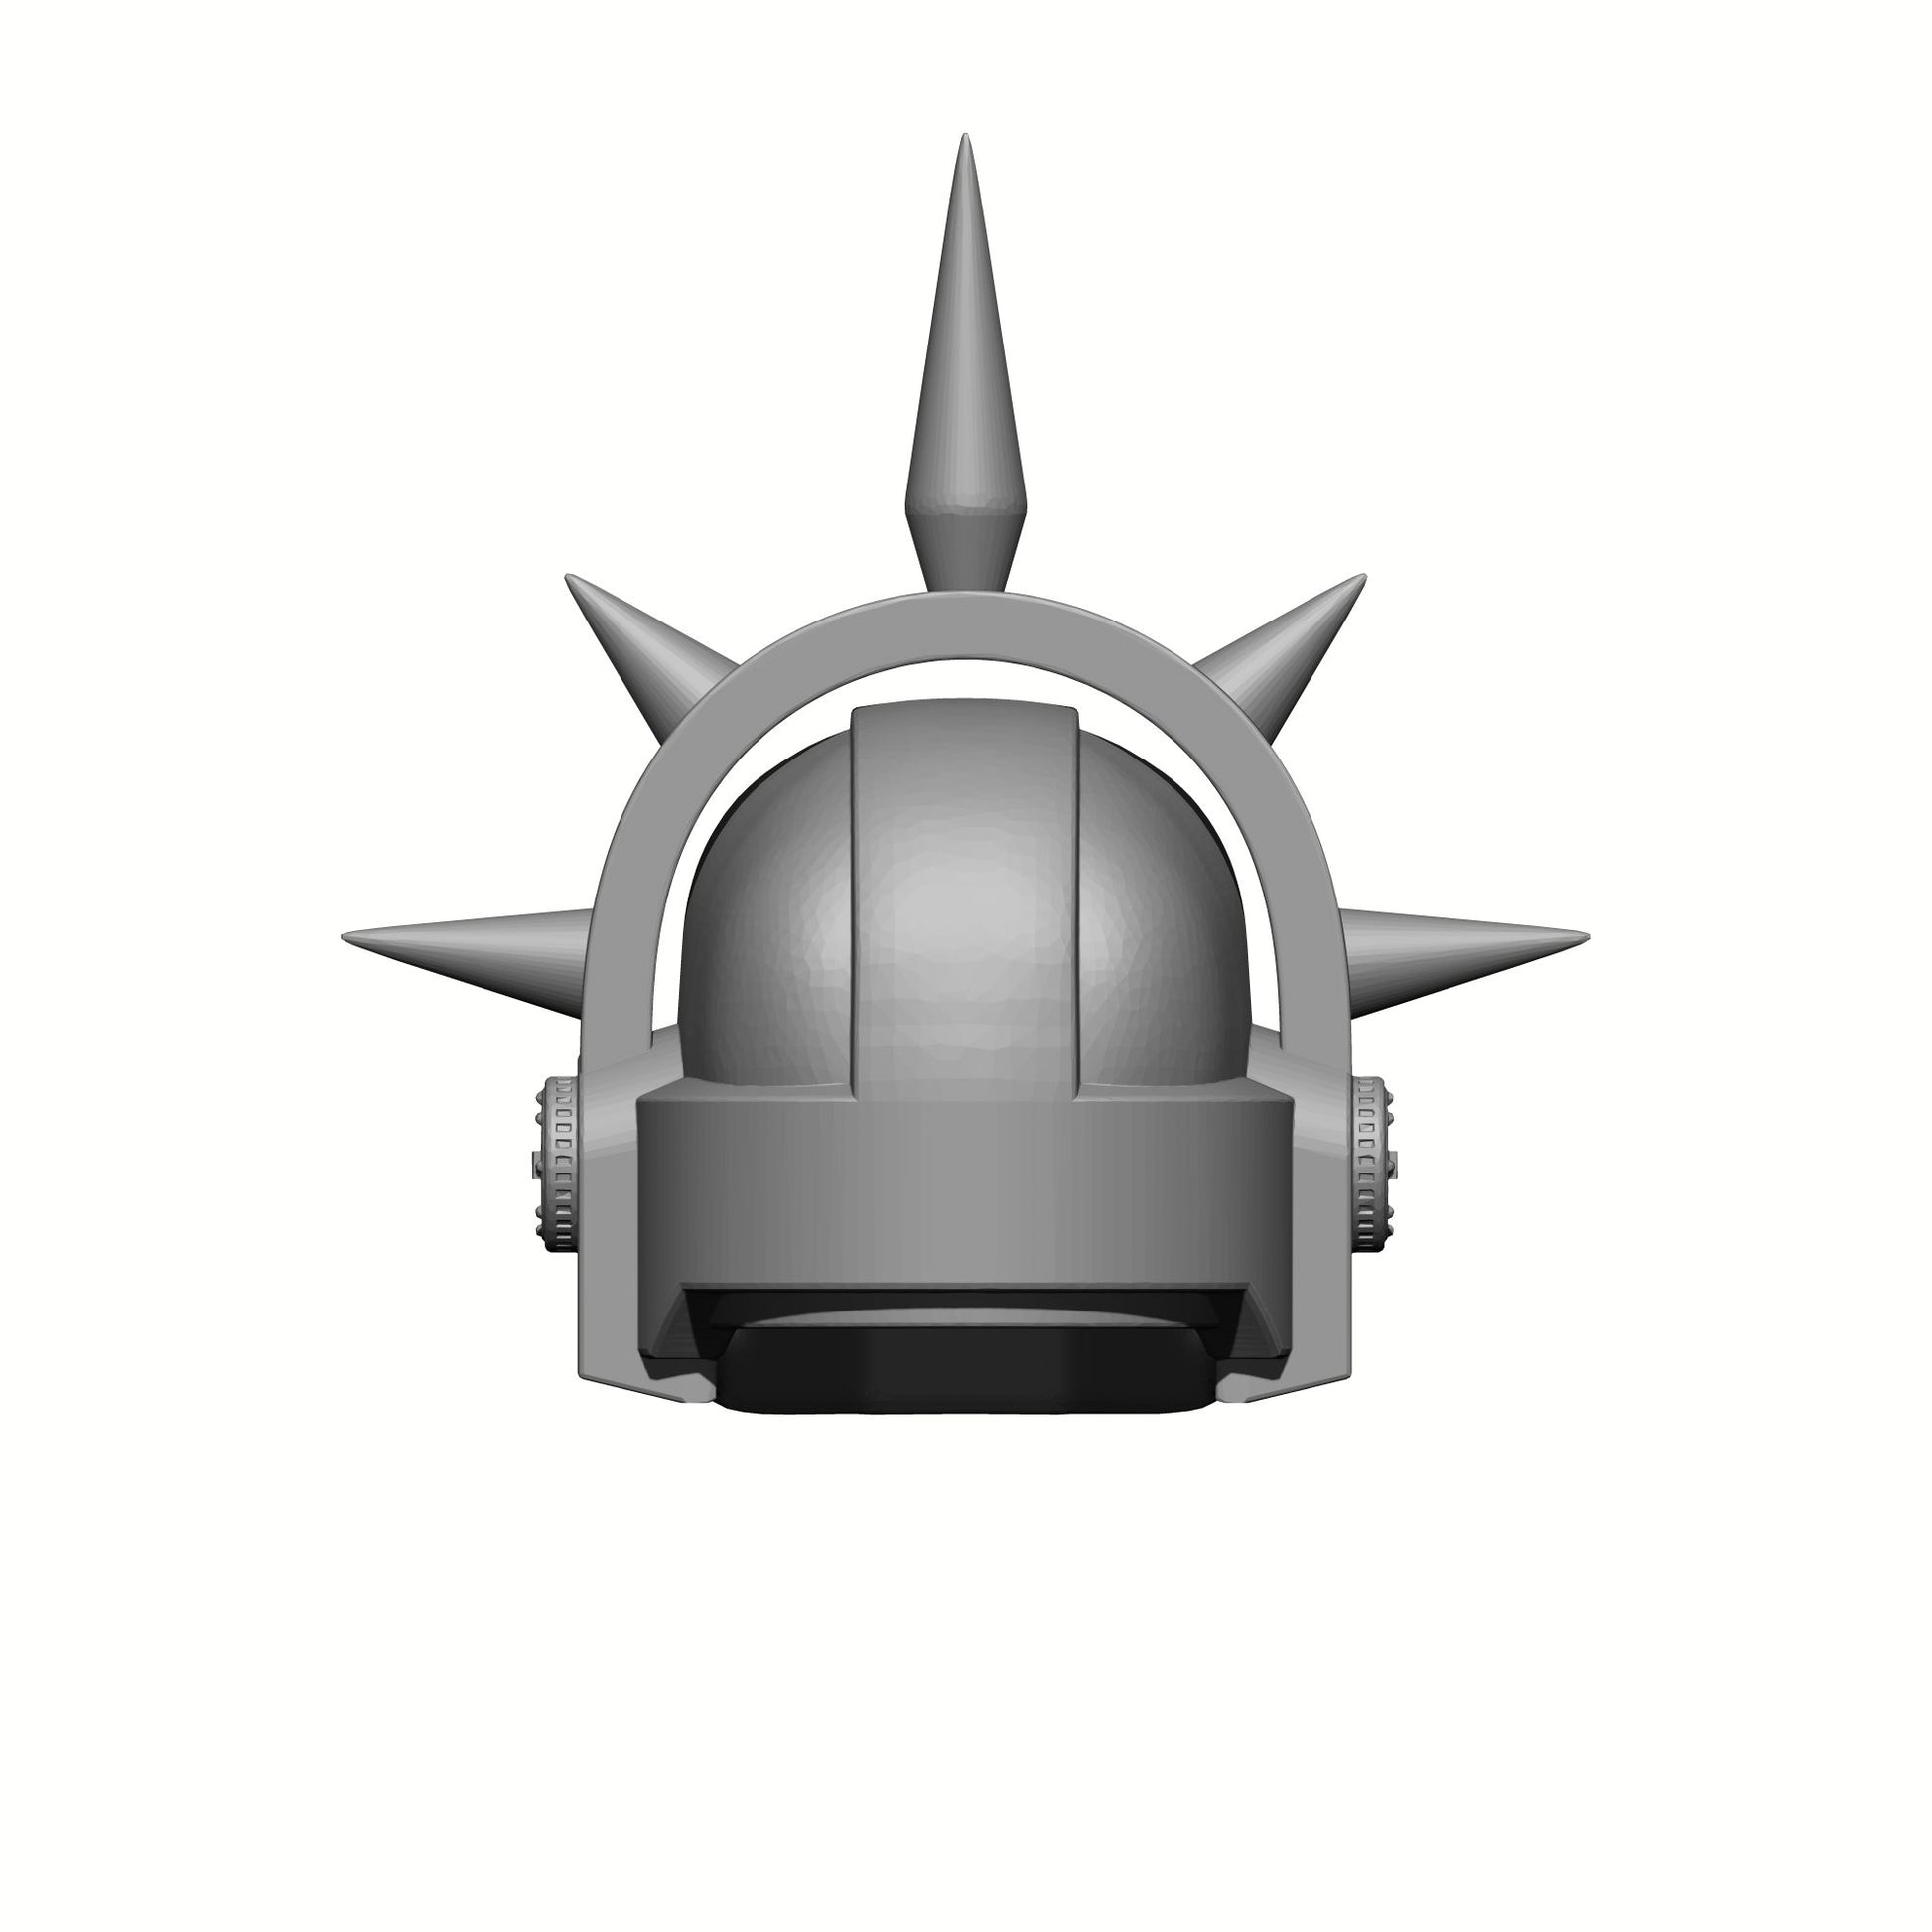 Sanguis Legion Mark VII Helmet with Blood Drop and Iron Spiked Halo: Gen: 7 Helmet Compatible with McFarlane Toys Action Figures